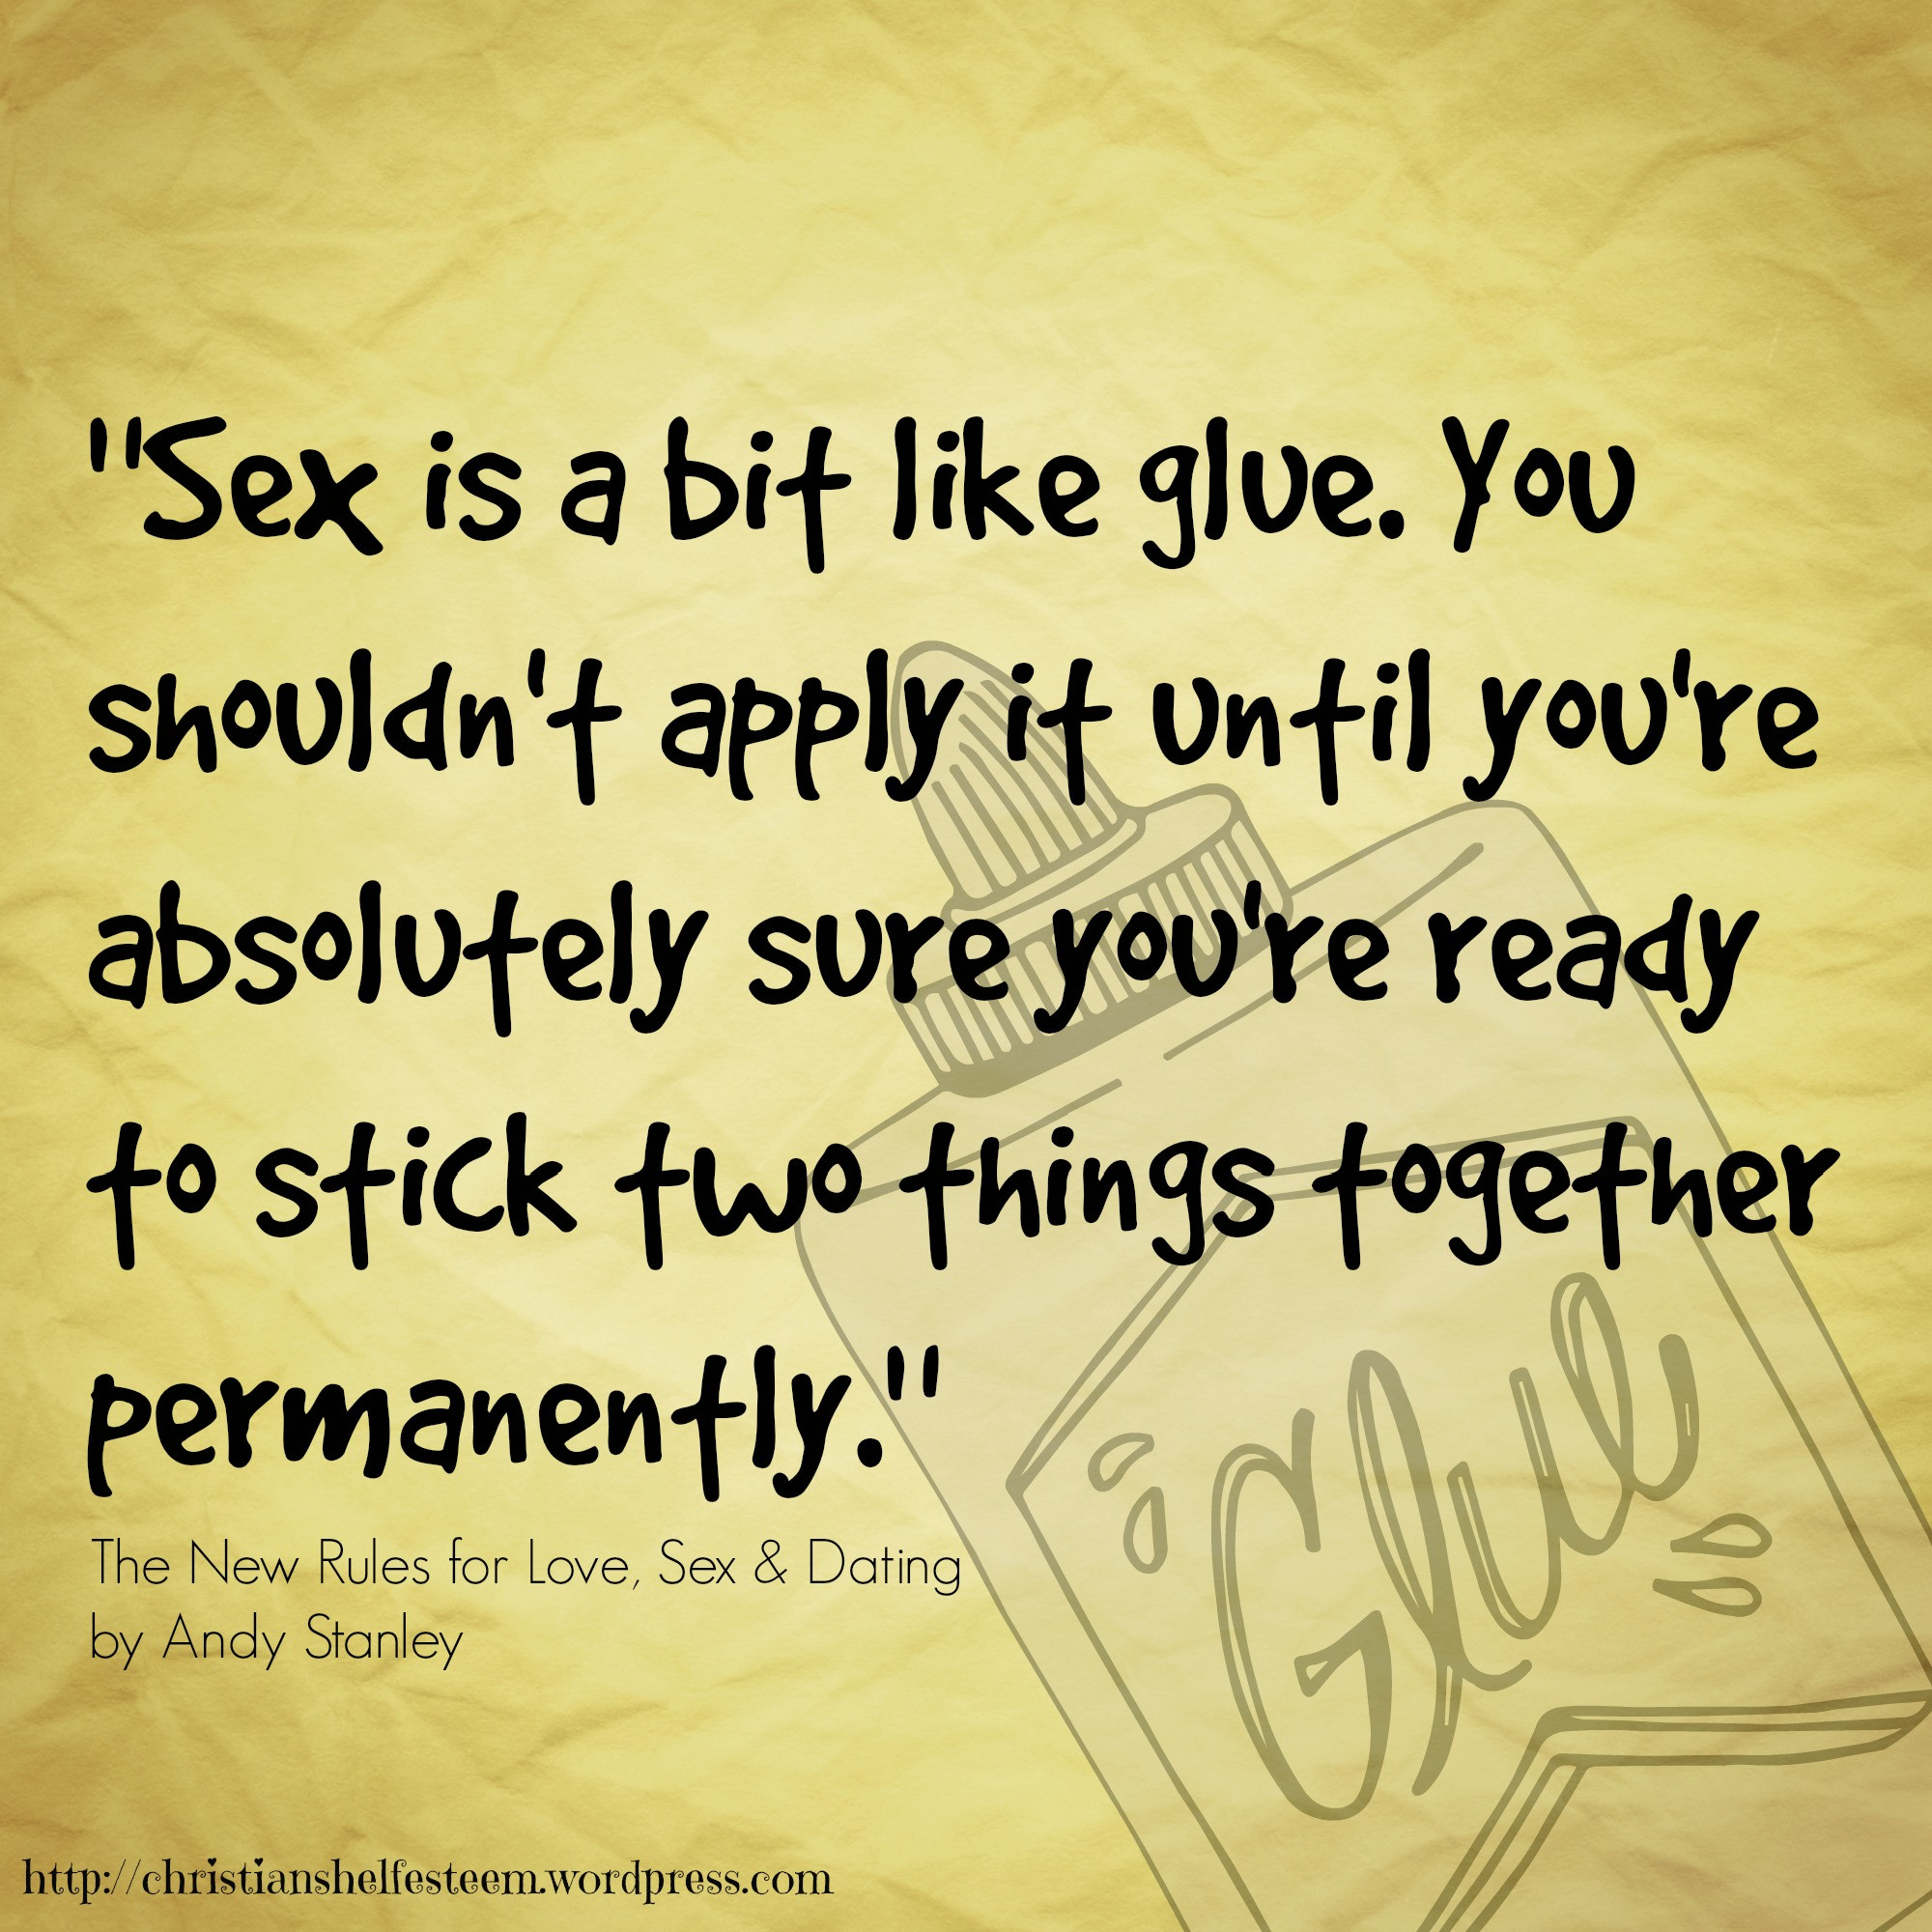 Sex Love Quotes
 The New Rules for Love & Dating by Andy Stanley